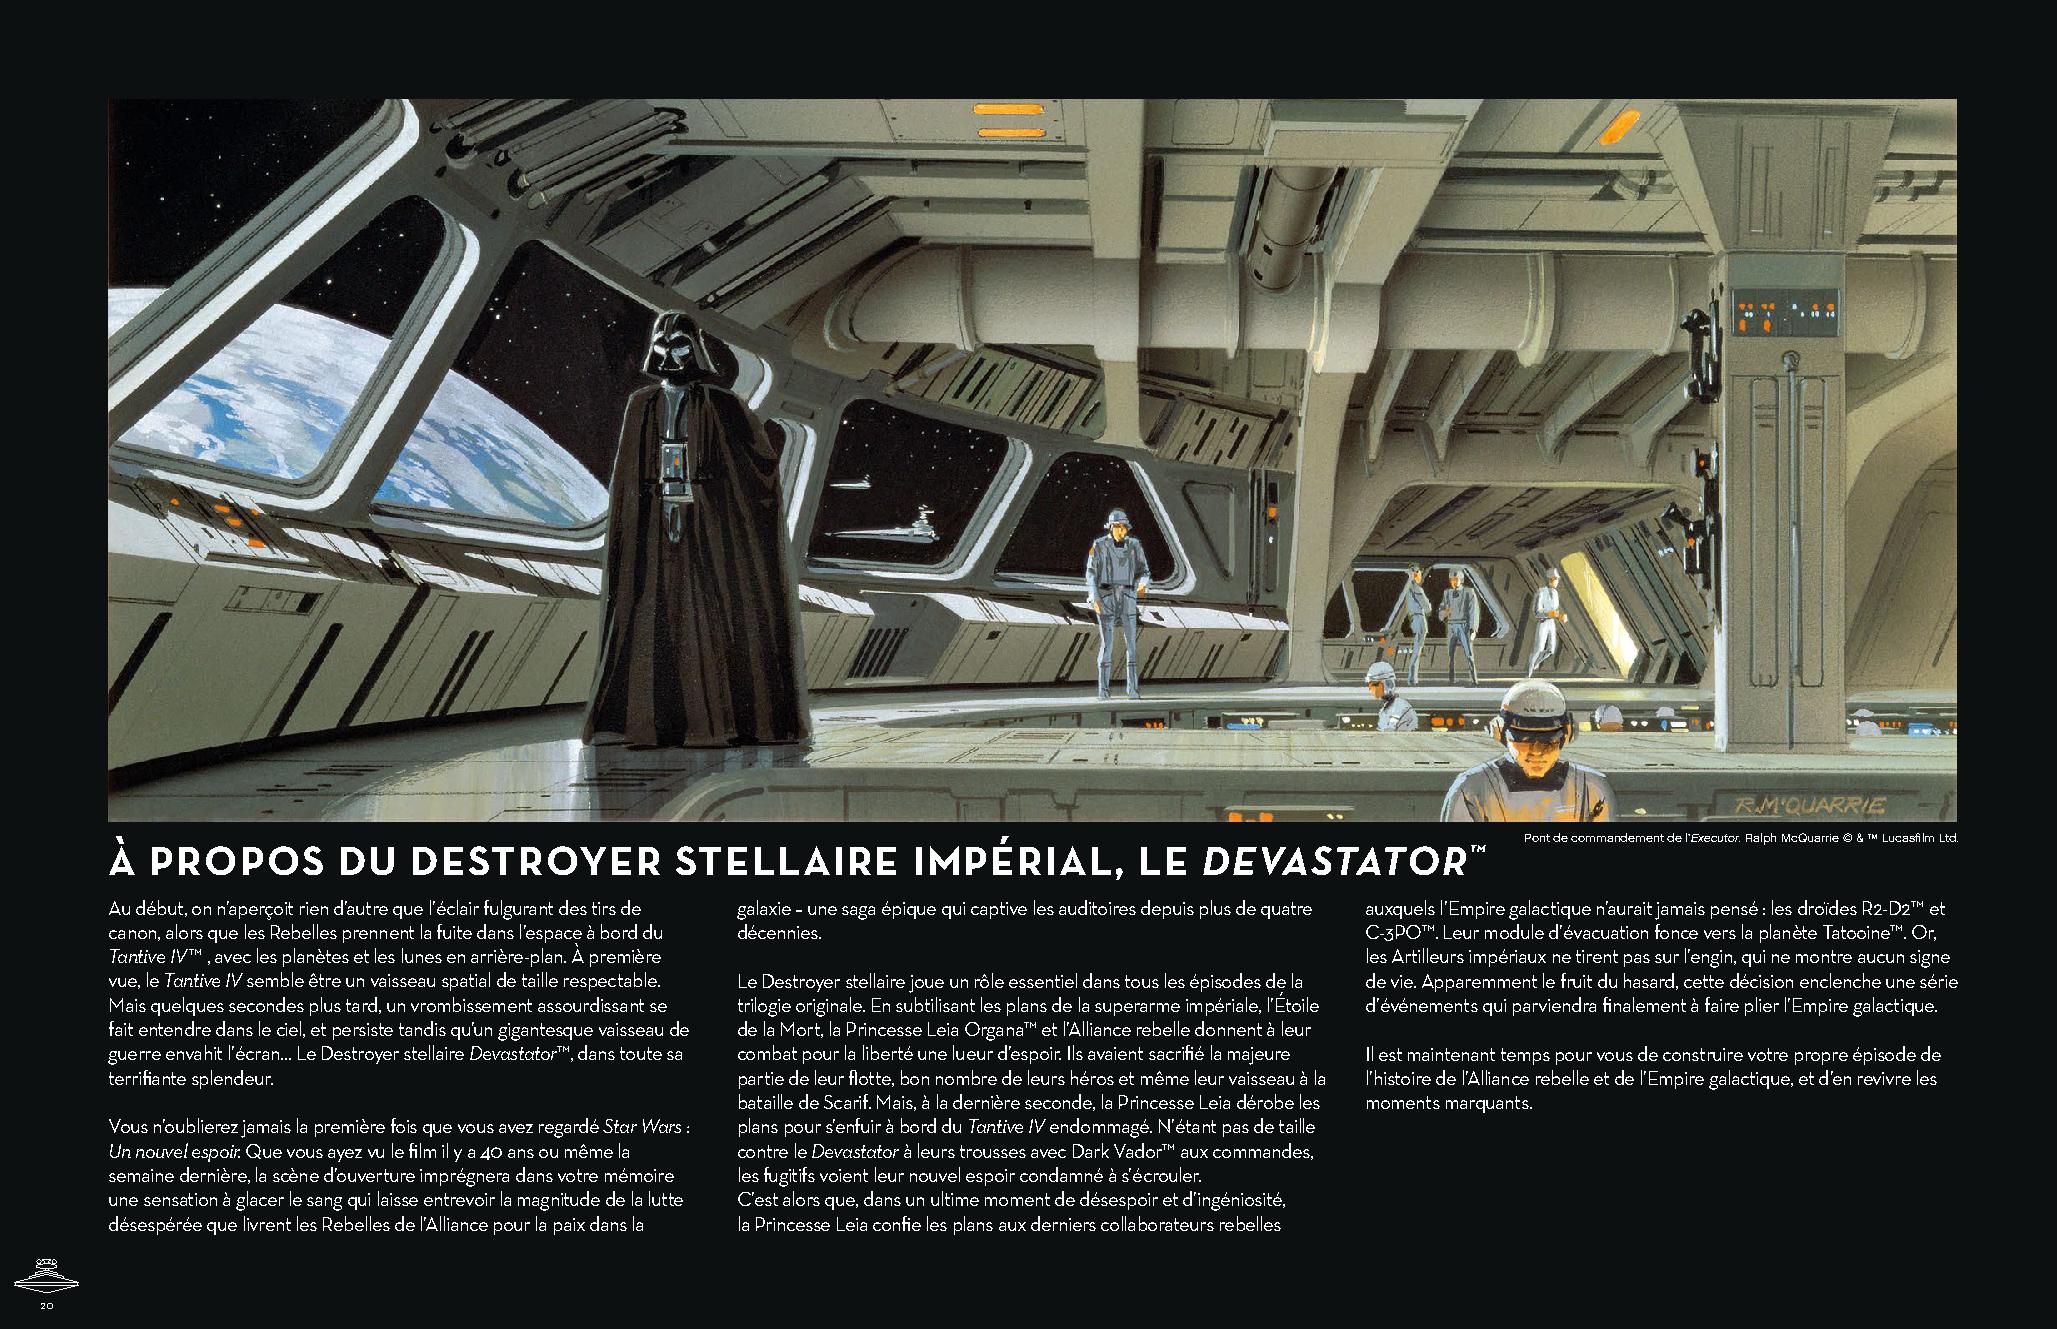 Imperial Star Destroyer 75252 レゴの商品情報 レゴの説明書・組立方法 20 page